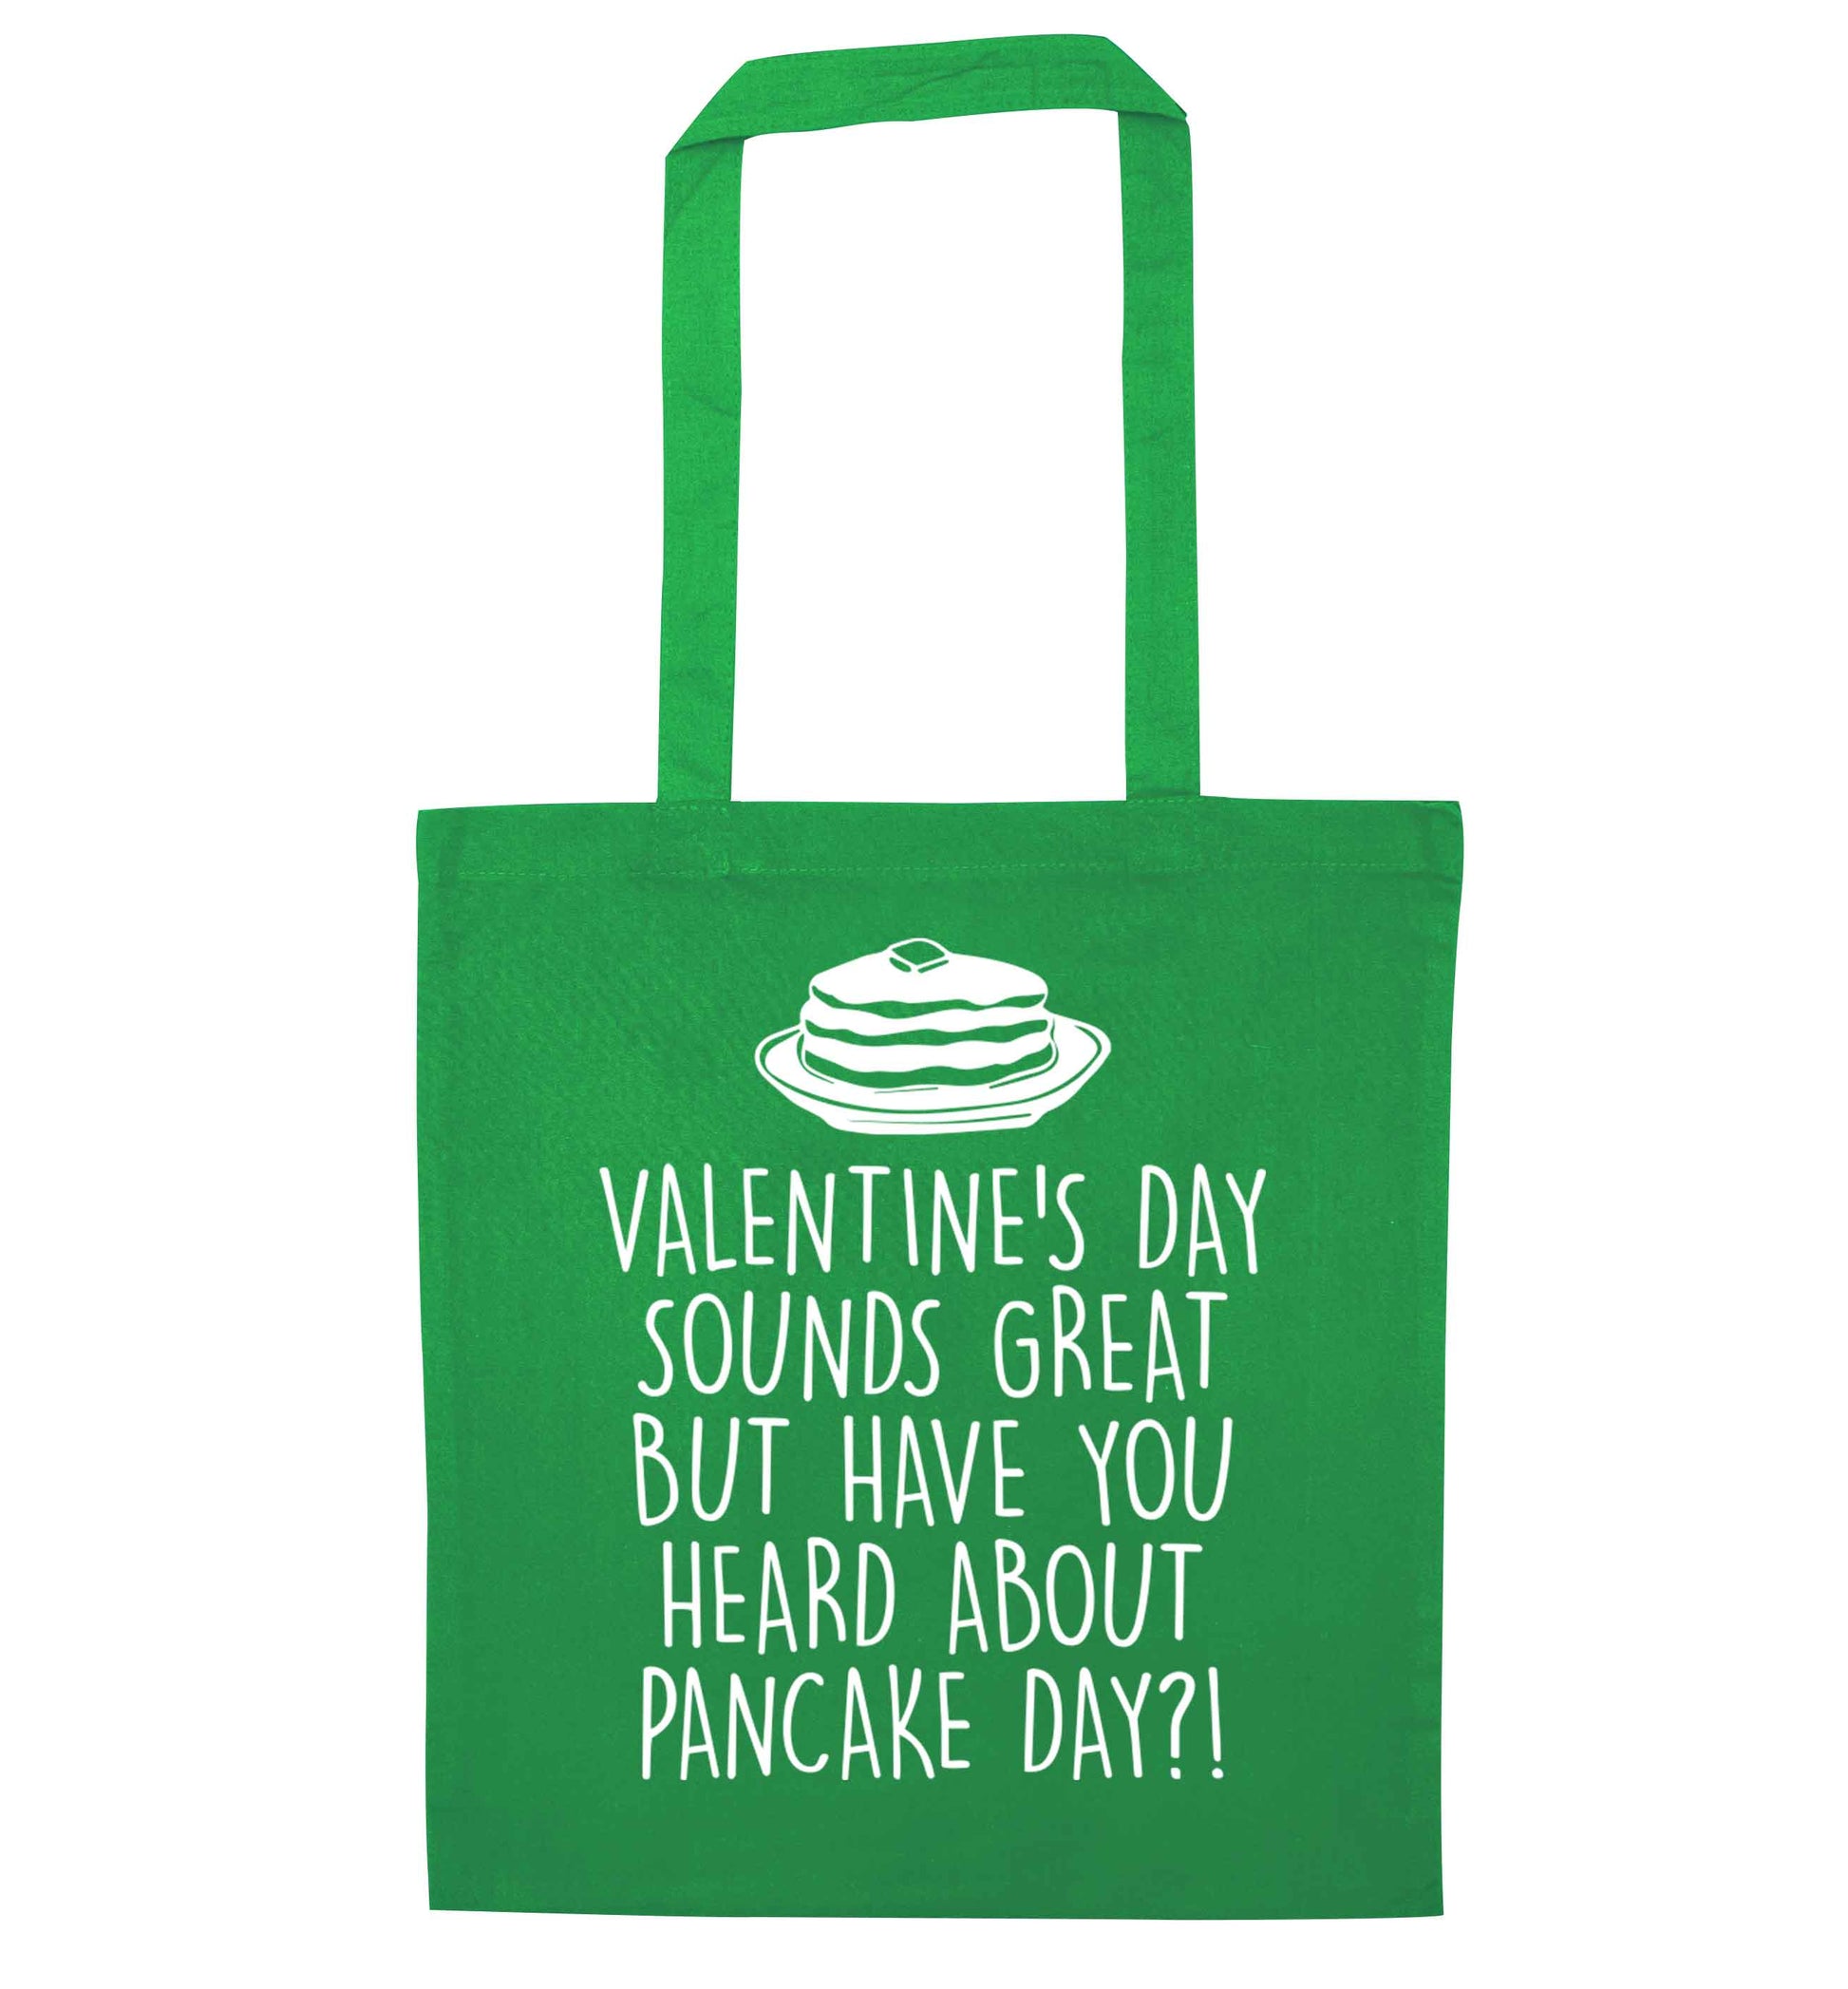 Valentine's day sounds great but have you heard about pancake day?! green tote bag